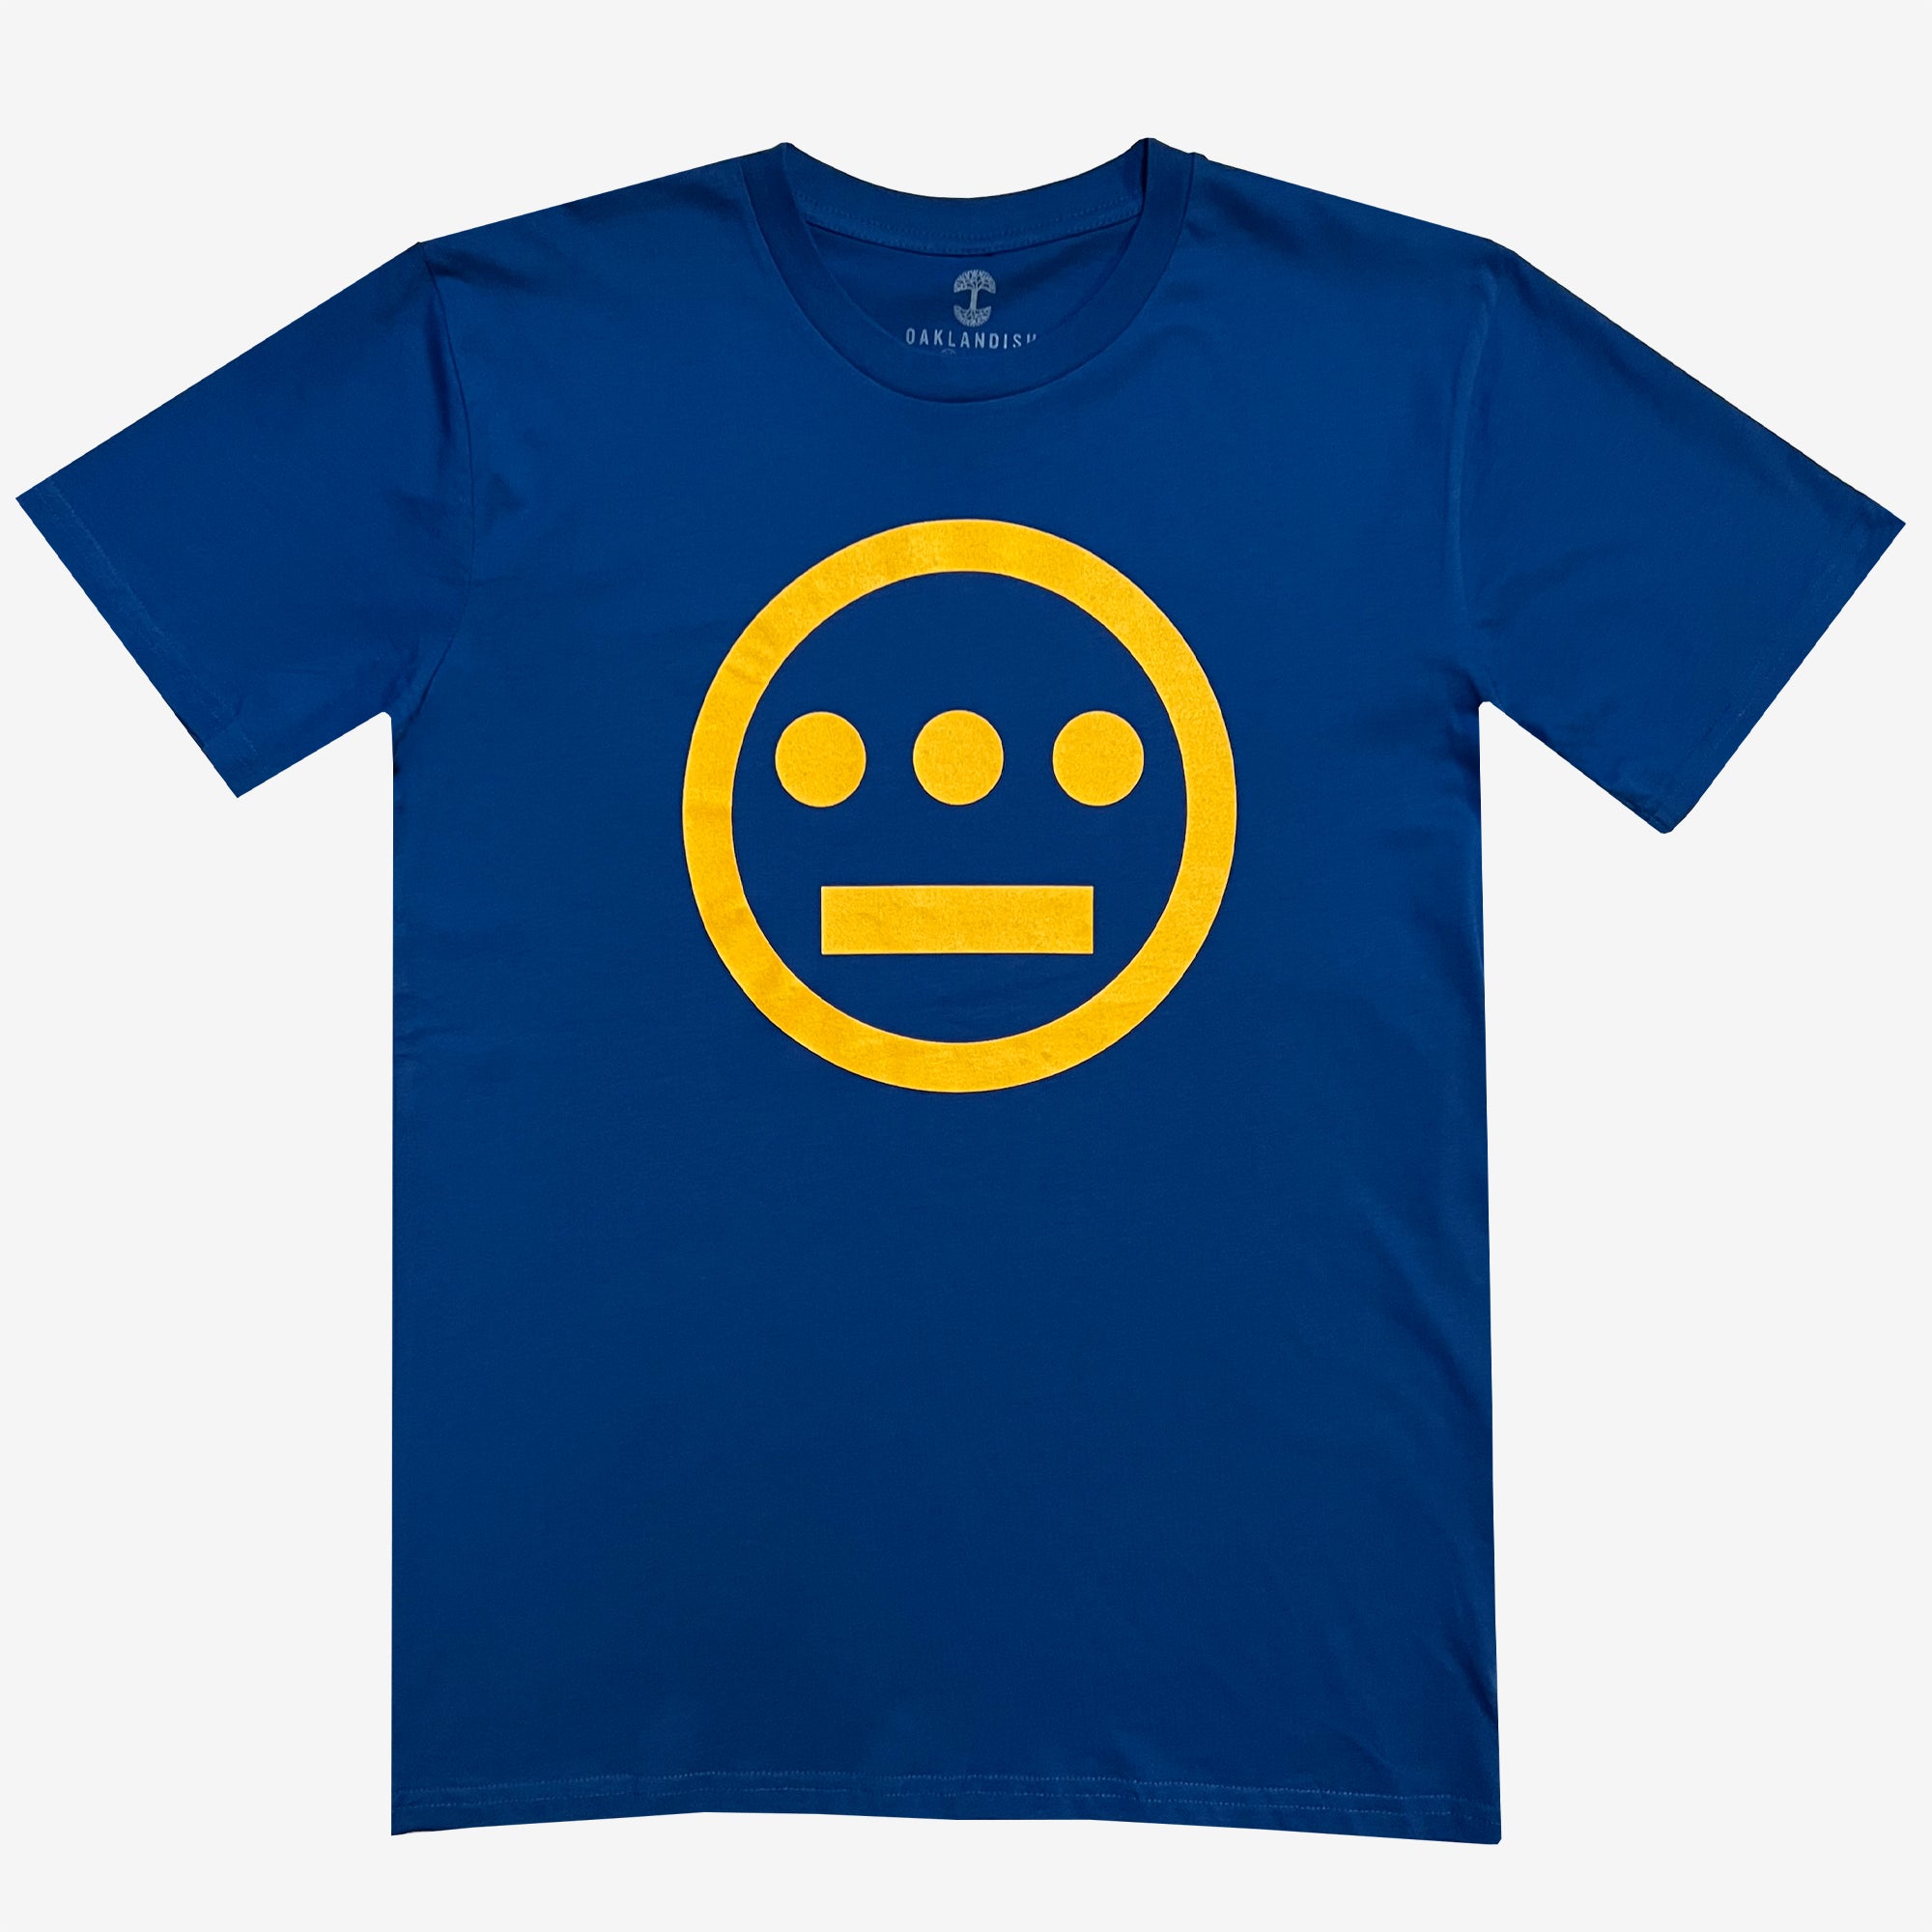 Royal blue t-shirt with yellow Hieroglyphics Hip-Hop logo on center chest.